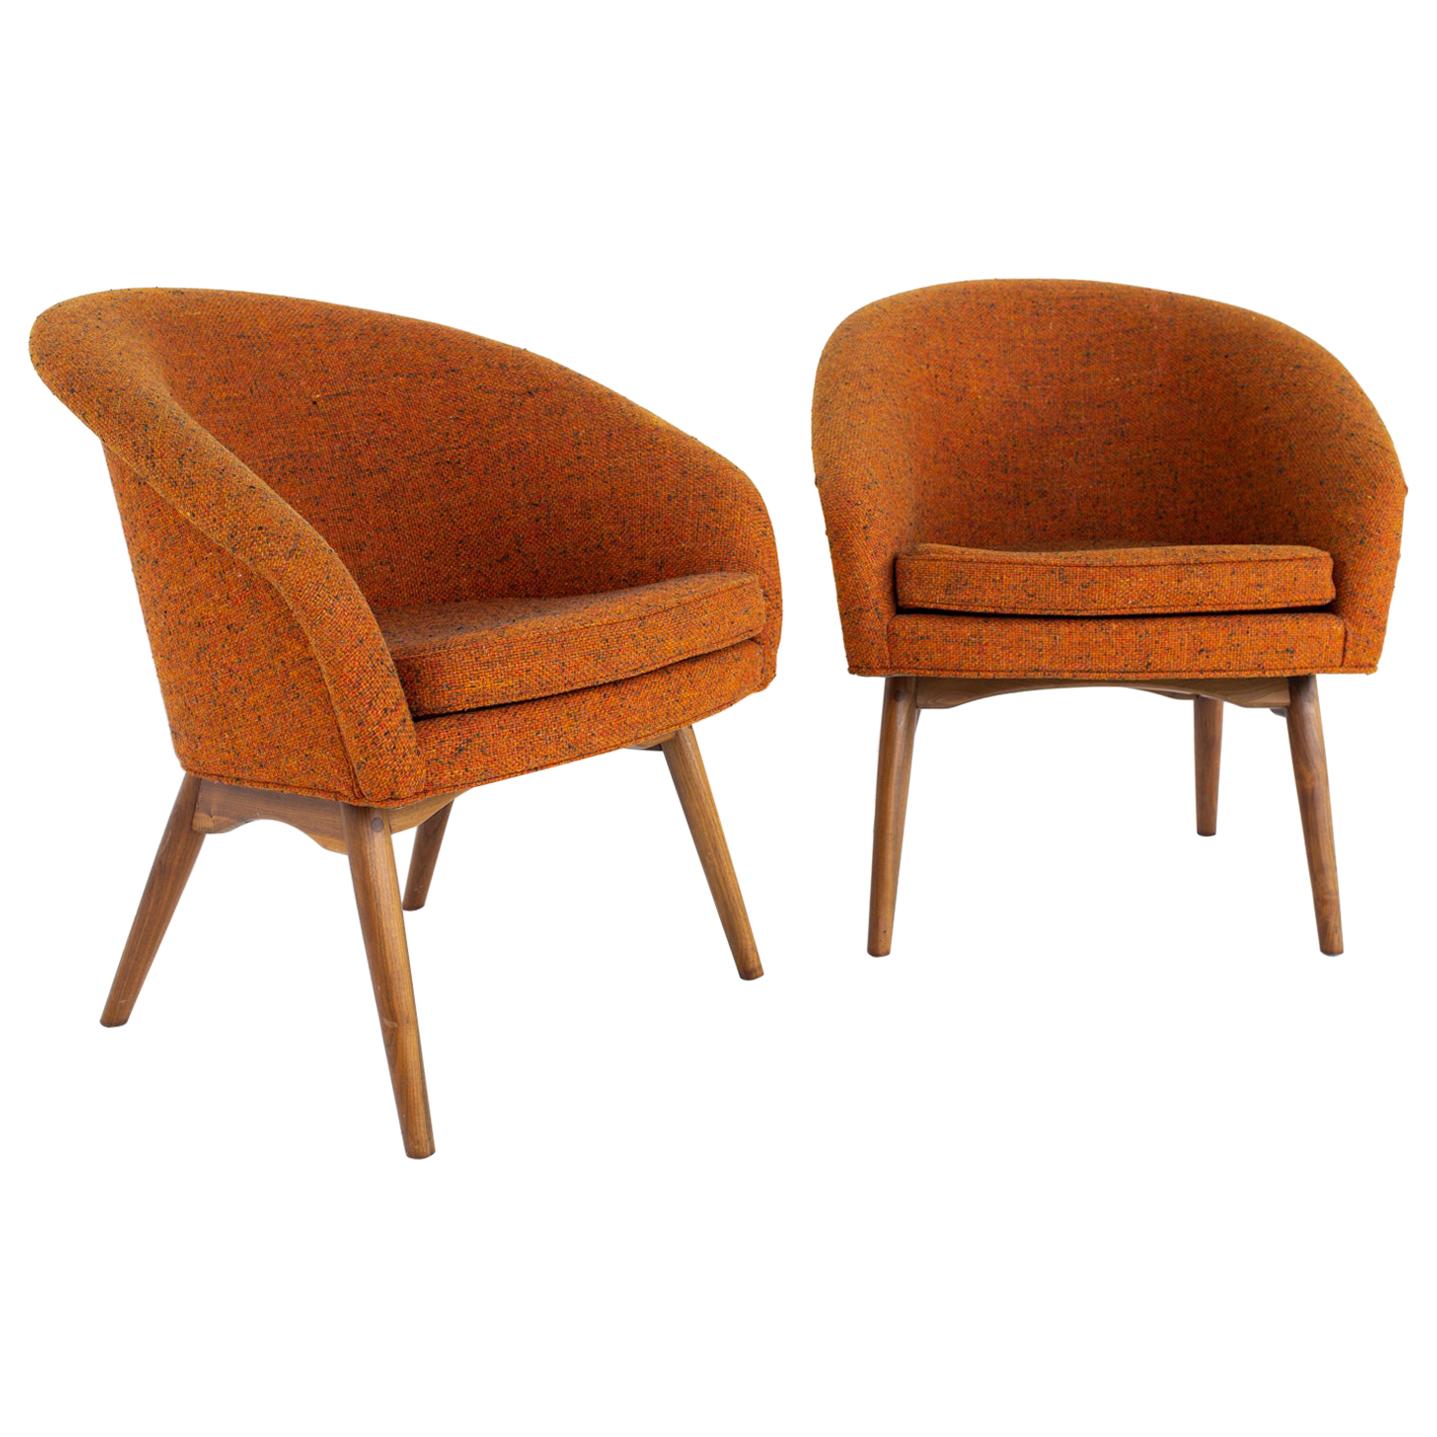 Milo Baughman for Thayer Coggin MCM Orange Upholstered Lounge Chairs, a Pair